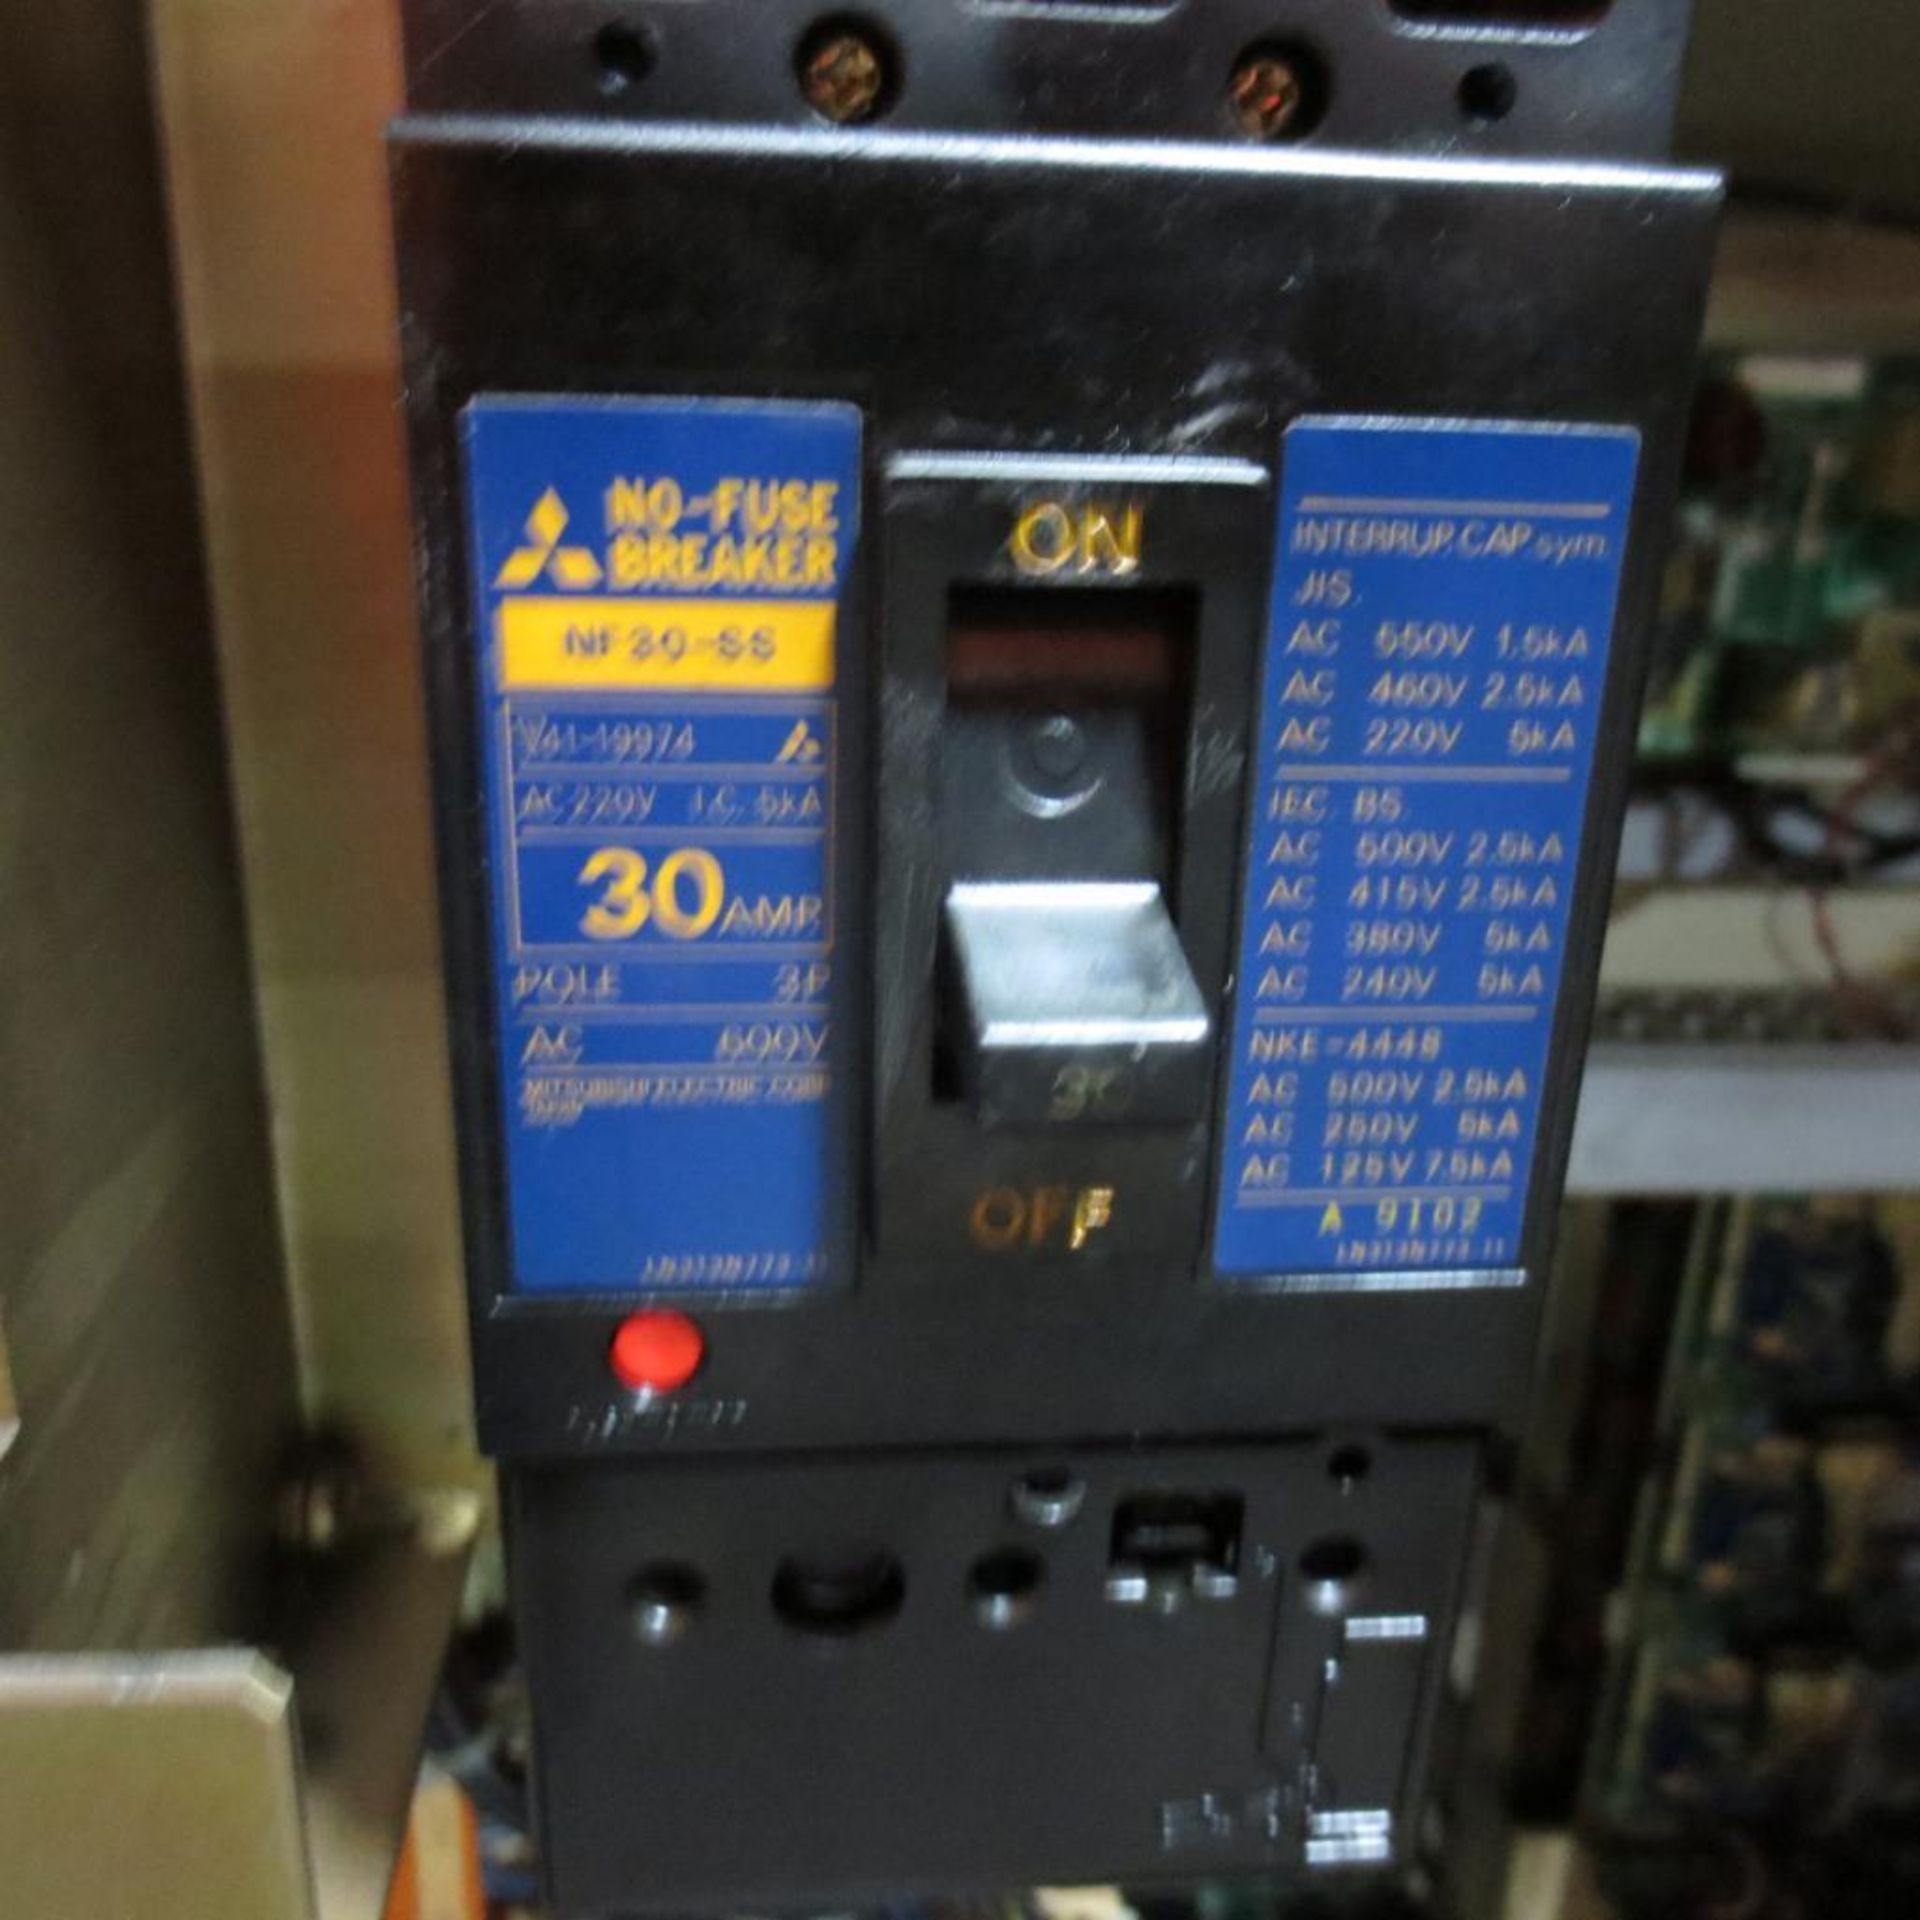 Yasnac ERC Motoman KSS Control Cabinet. Loading Fee is $20.00 - Image 5 of 6